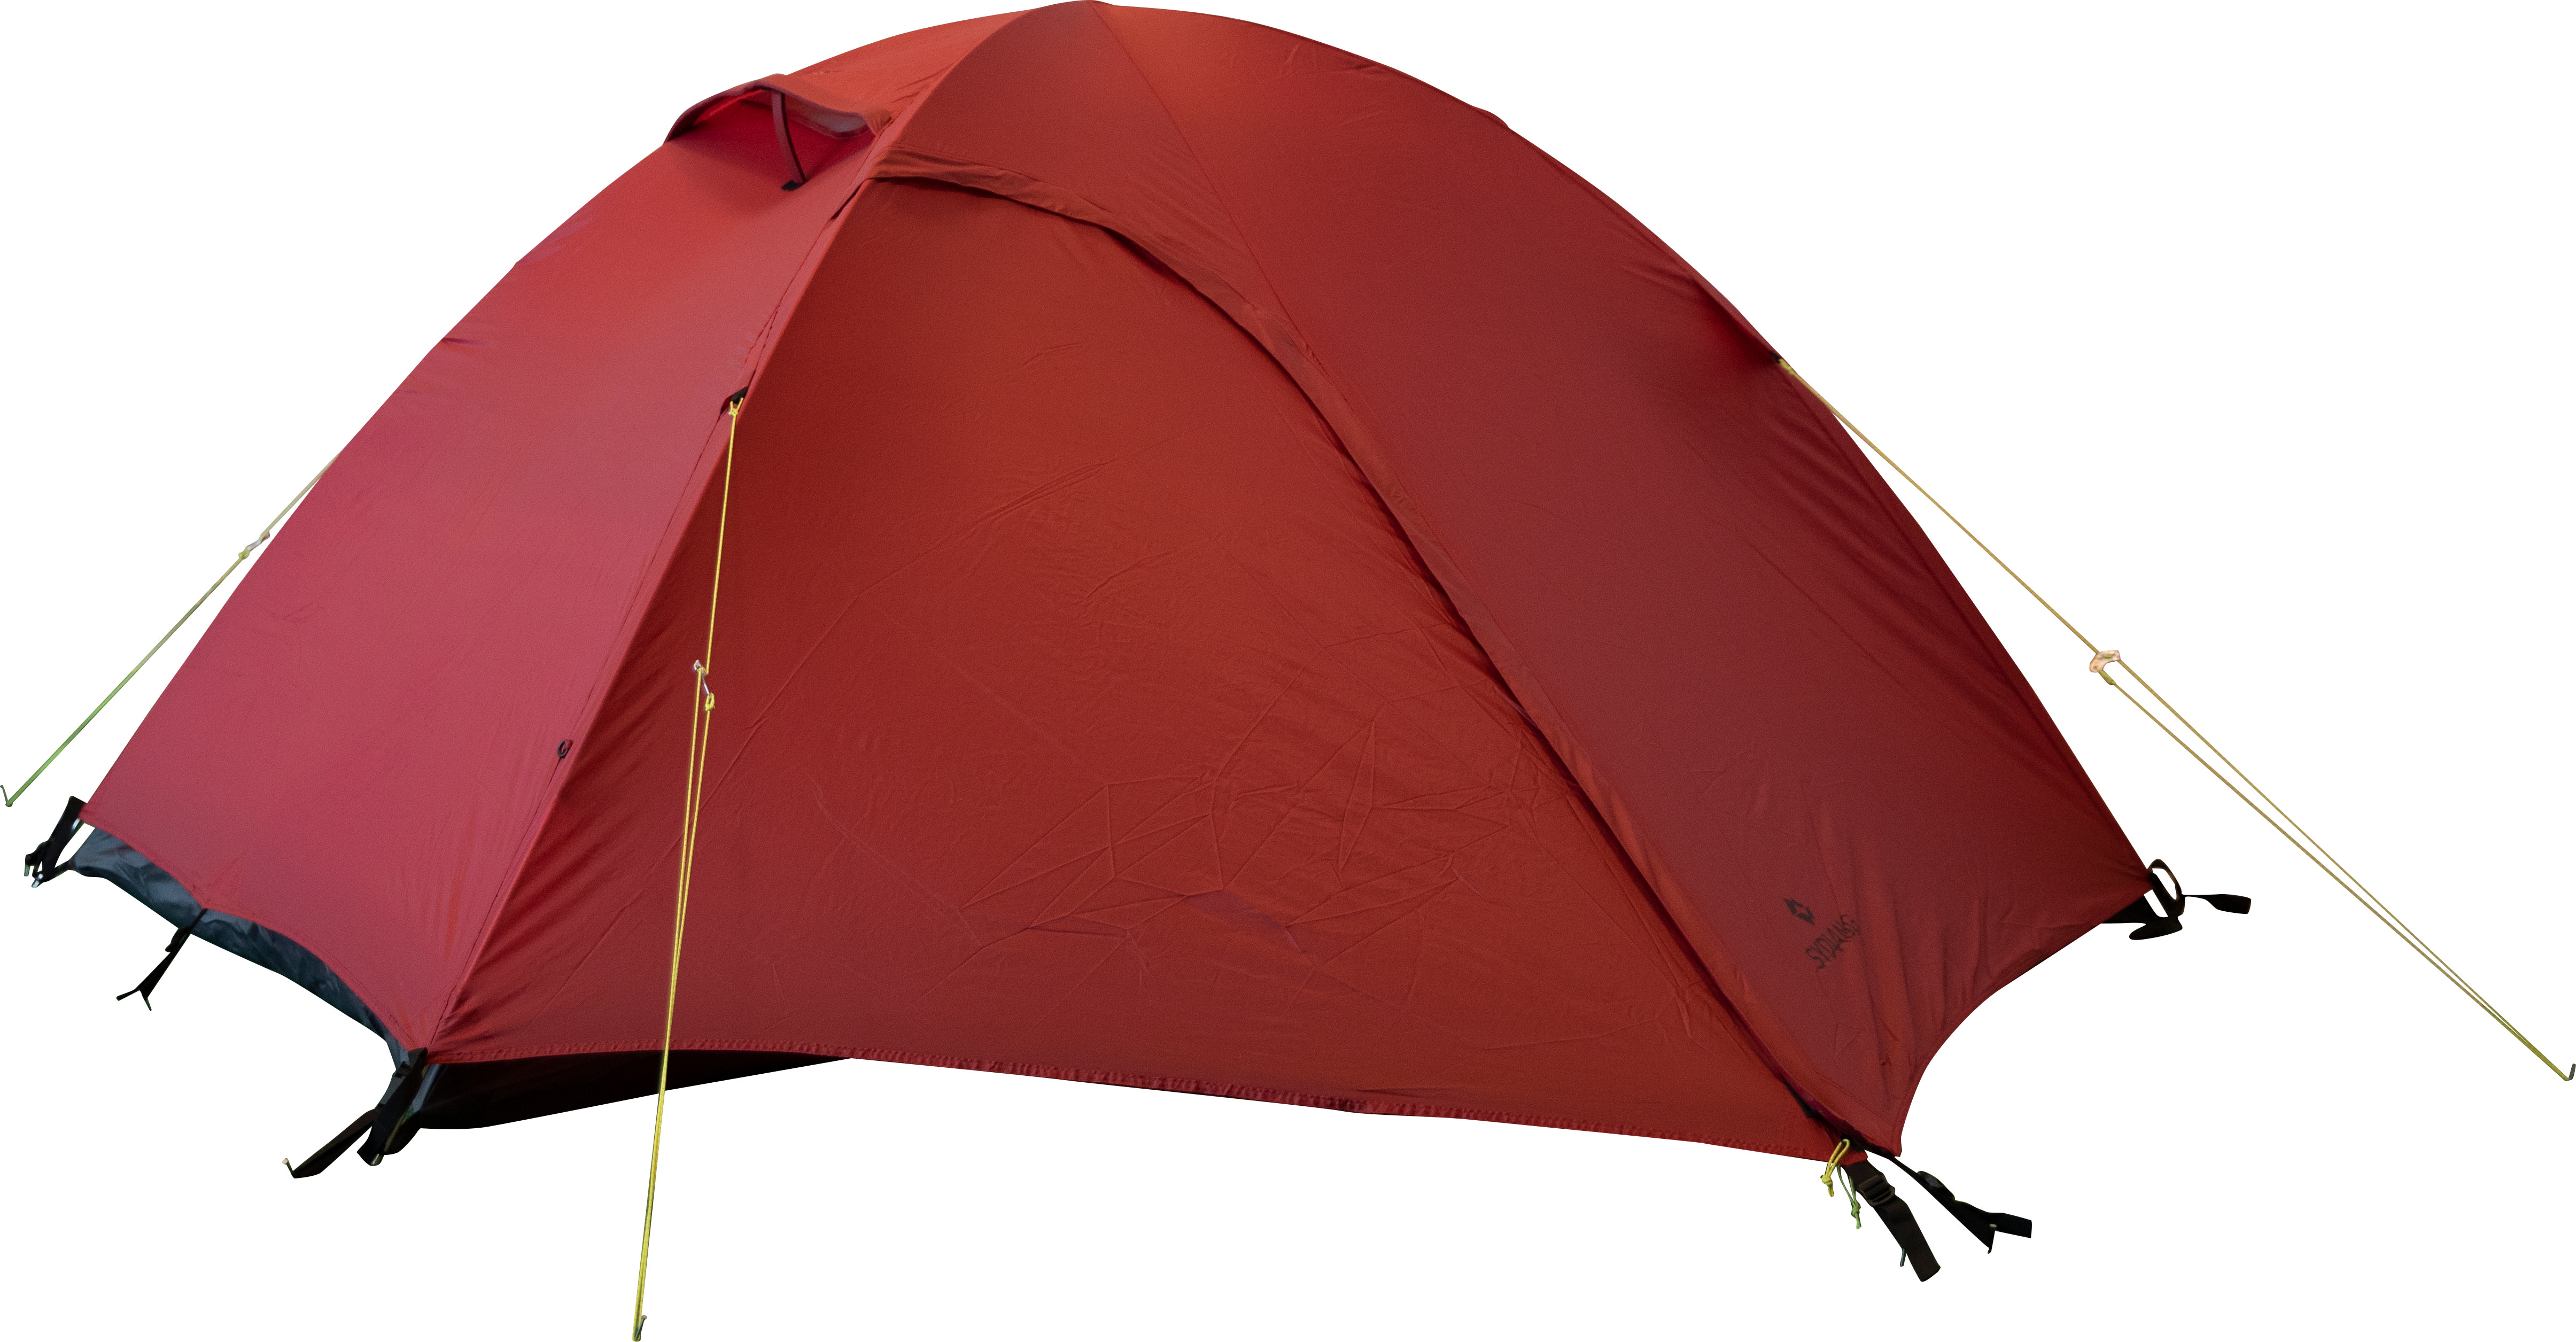 Sydvang Utoset 2-Person UL Tent Haute Red